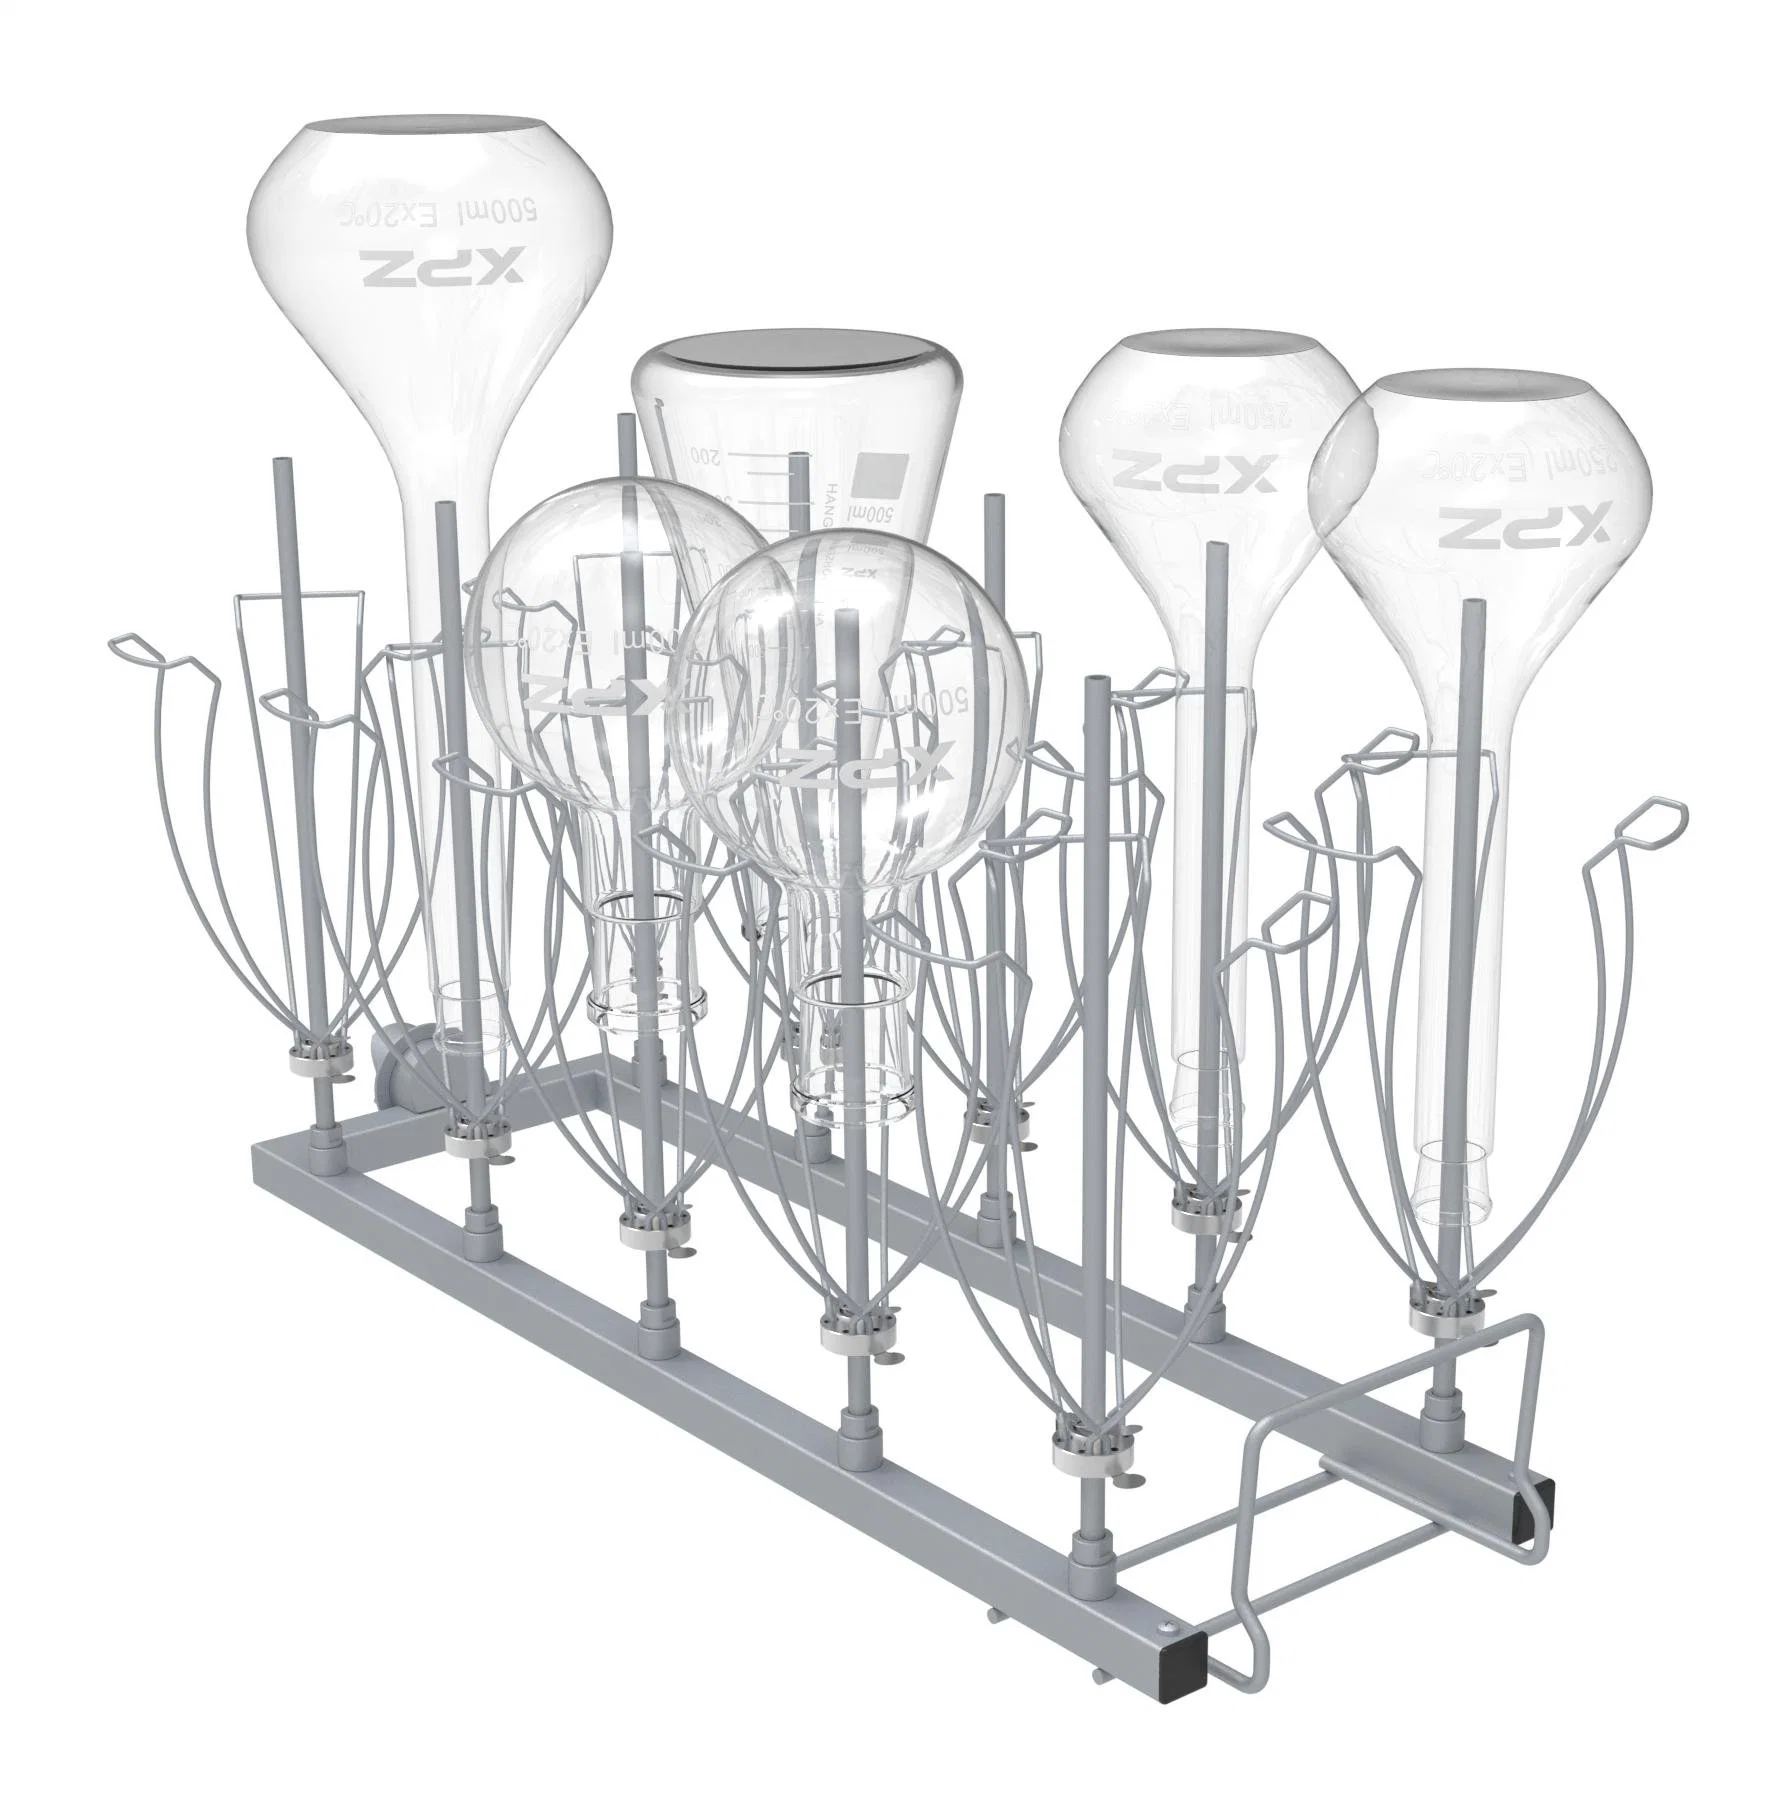 Syringe Cleaning Module 10 Positions for Cleaning Laboratory Glassware